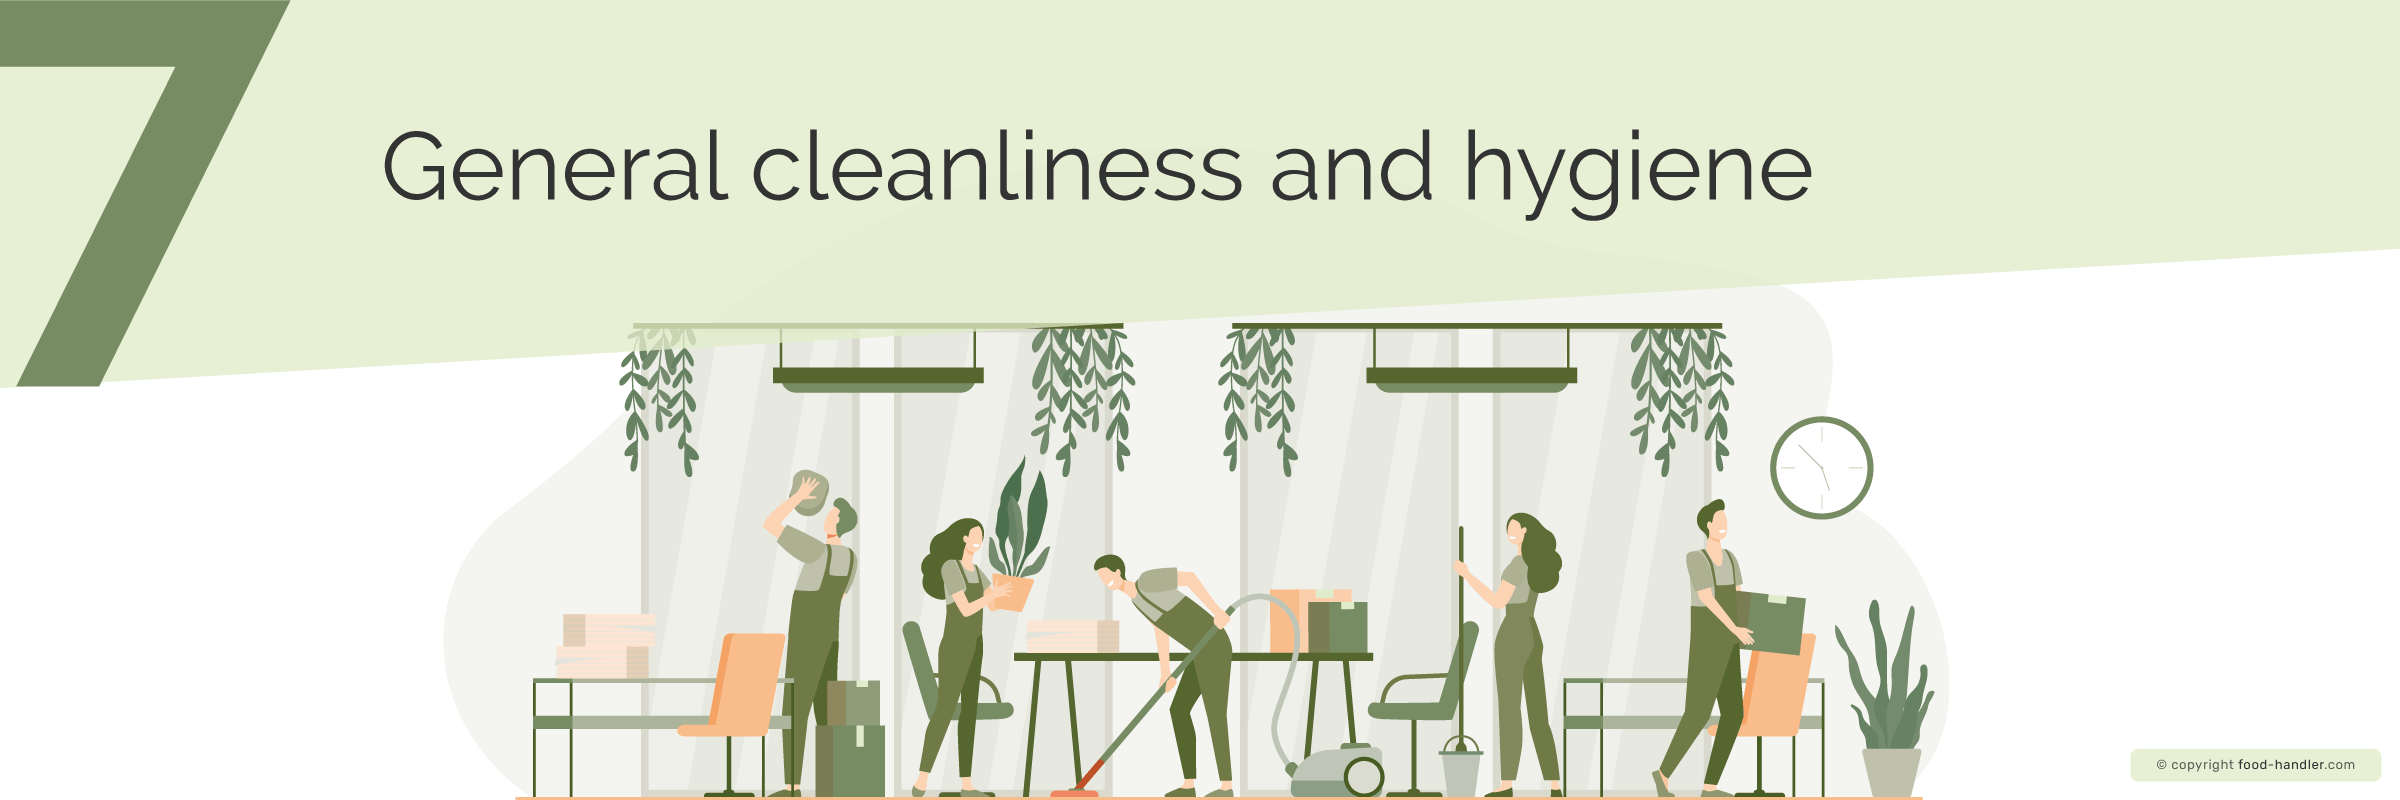 General cleanliness and hygiene